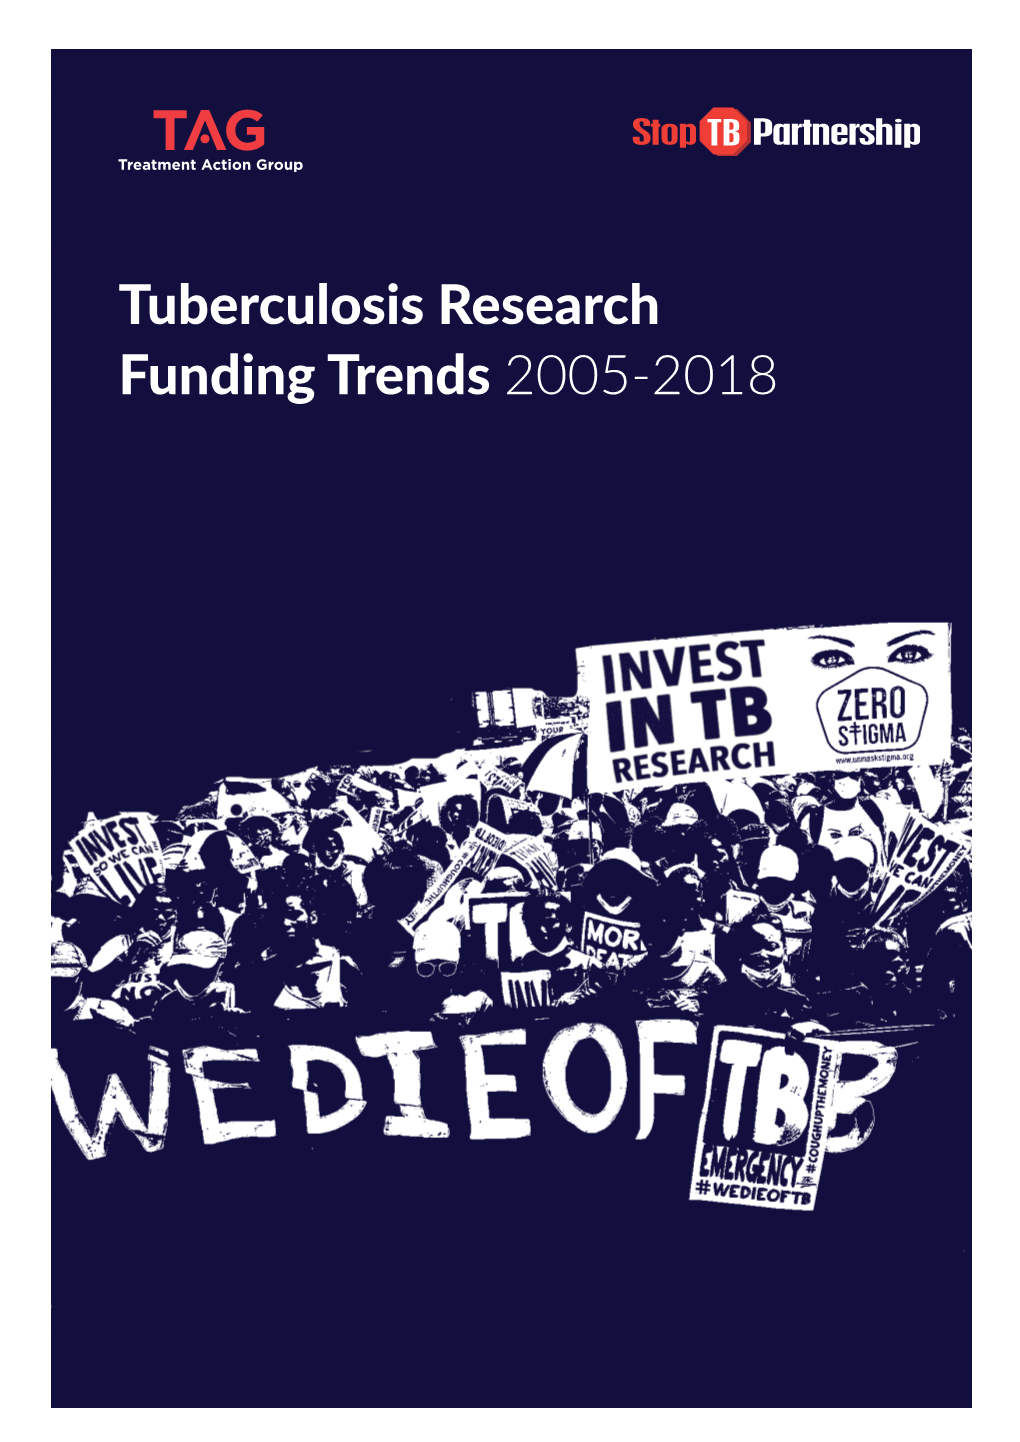 Tuberculosis Research Funding Trends 2005-2018